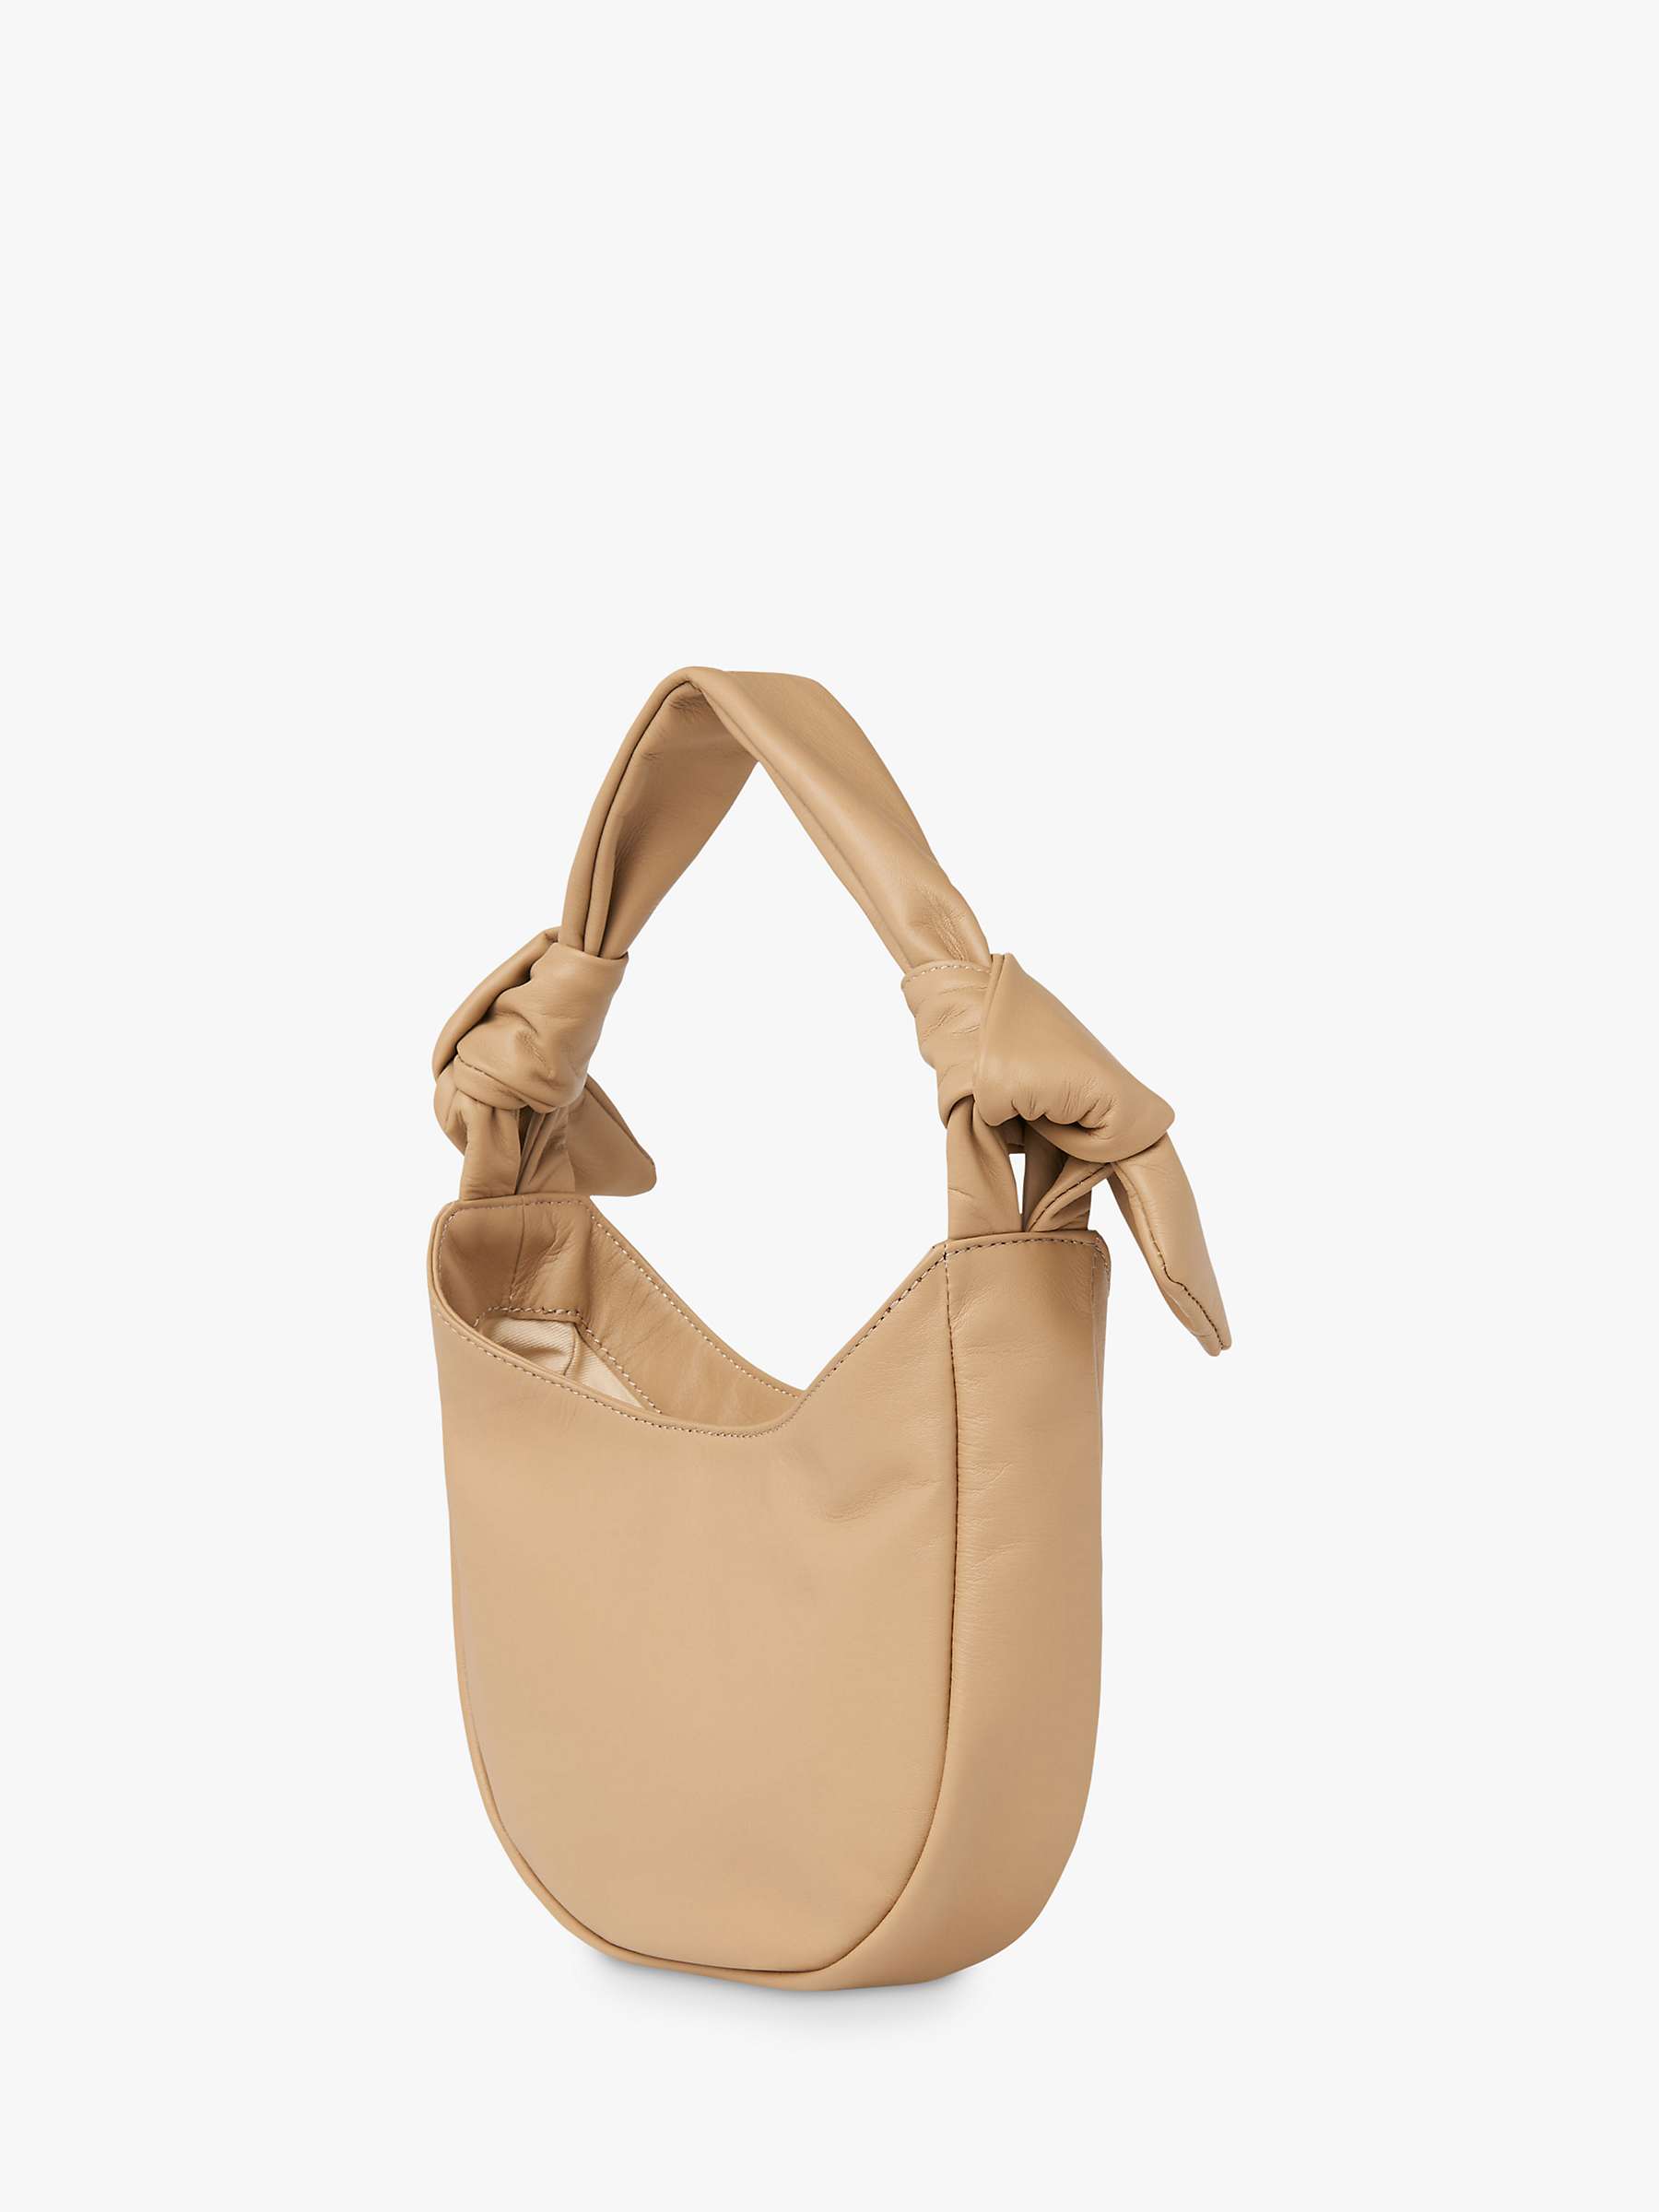 Buy Whistles Linden Knotted Handle Leather Bag Online at johnlewis.com